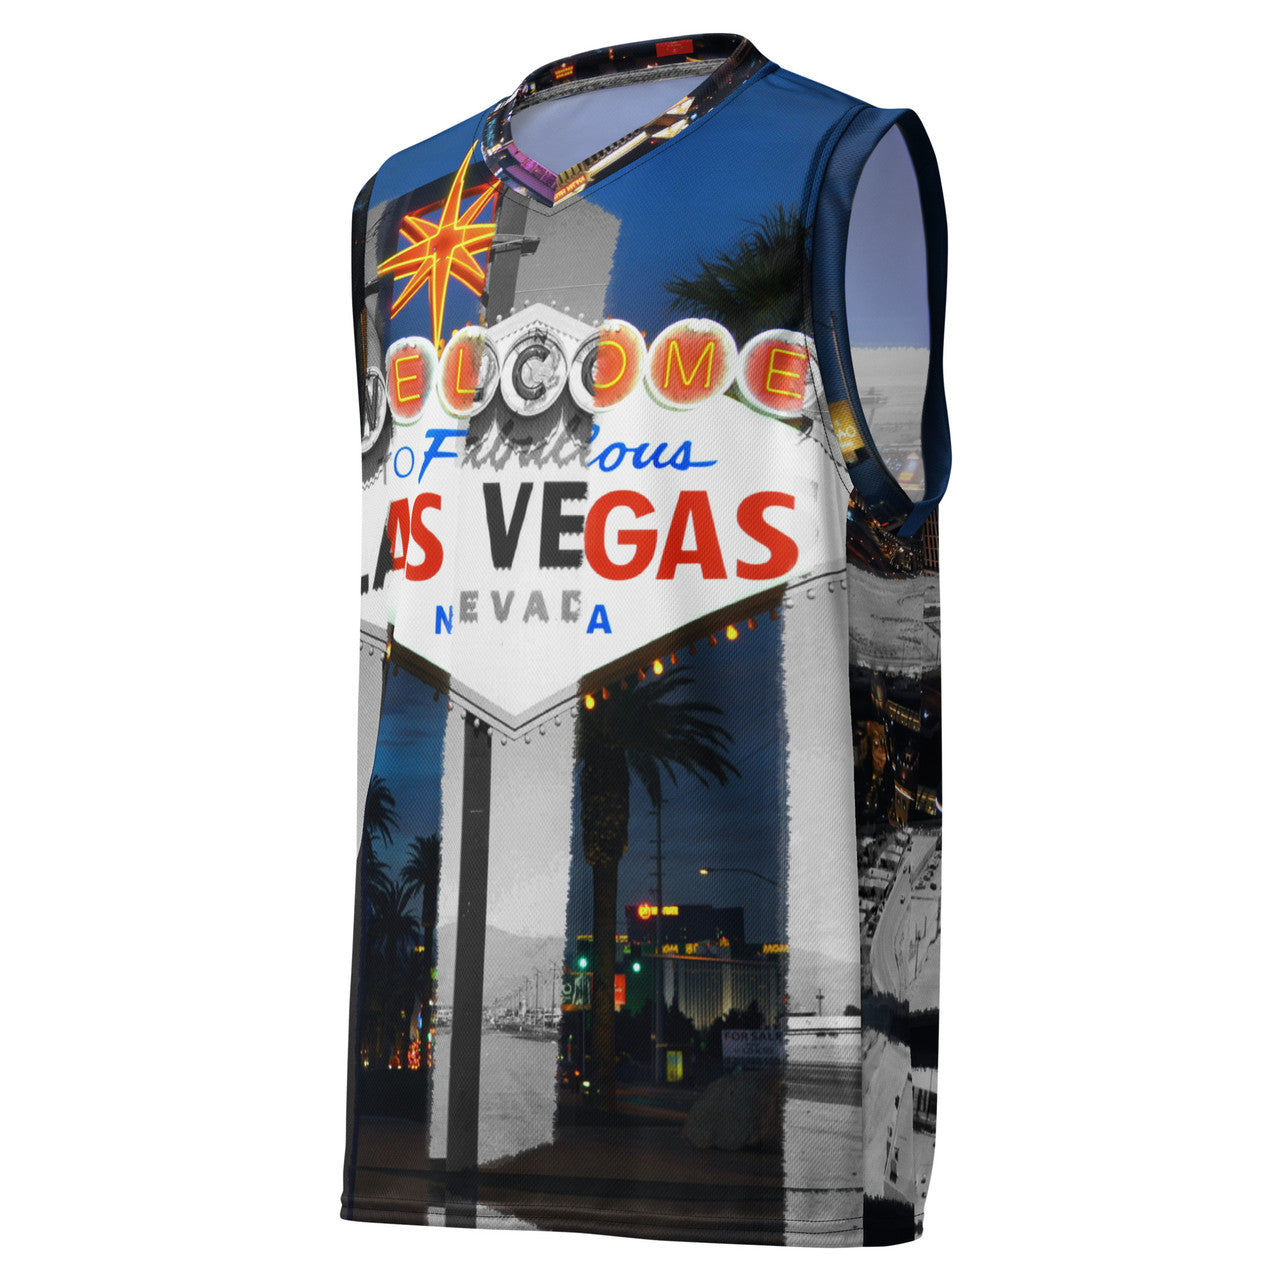 Las Vegas KiSS Recycled unisex basketball jersey - Then and Now history